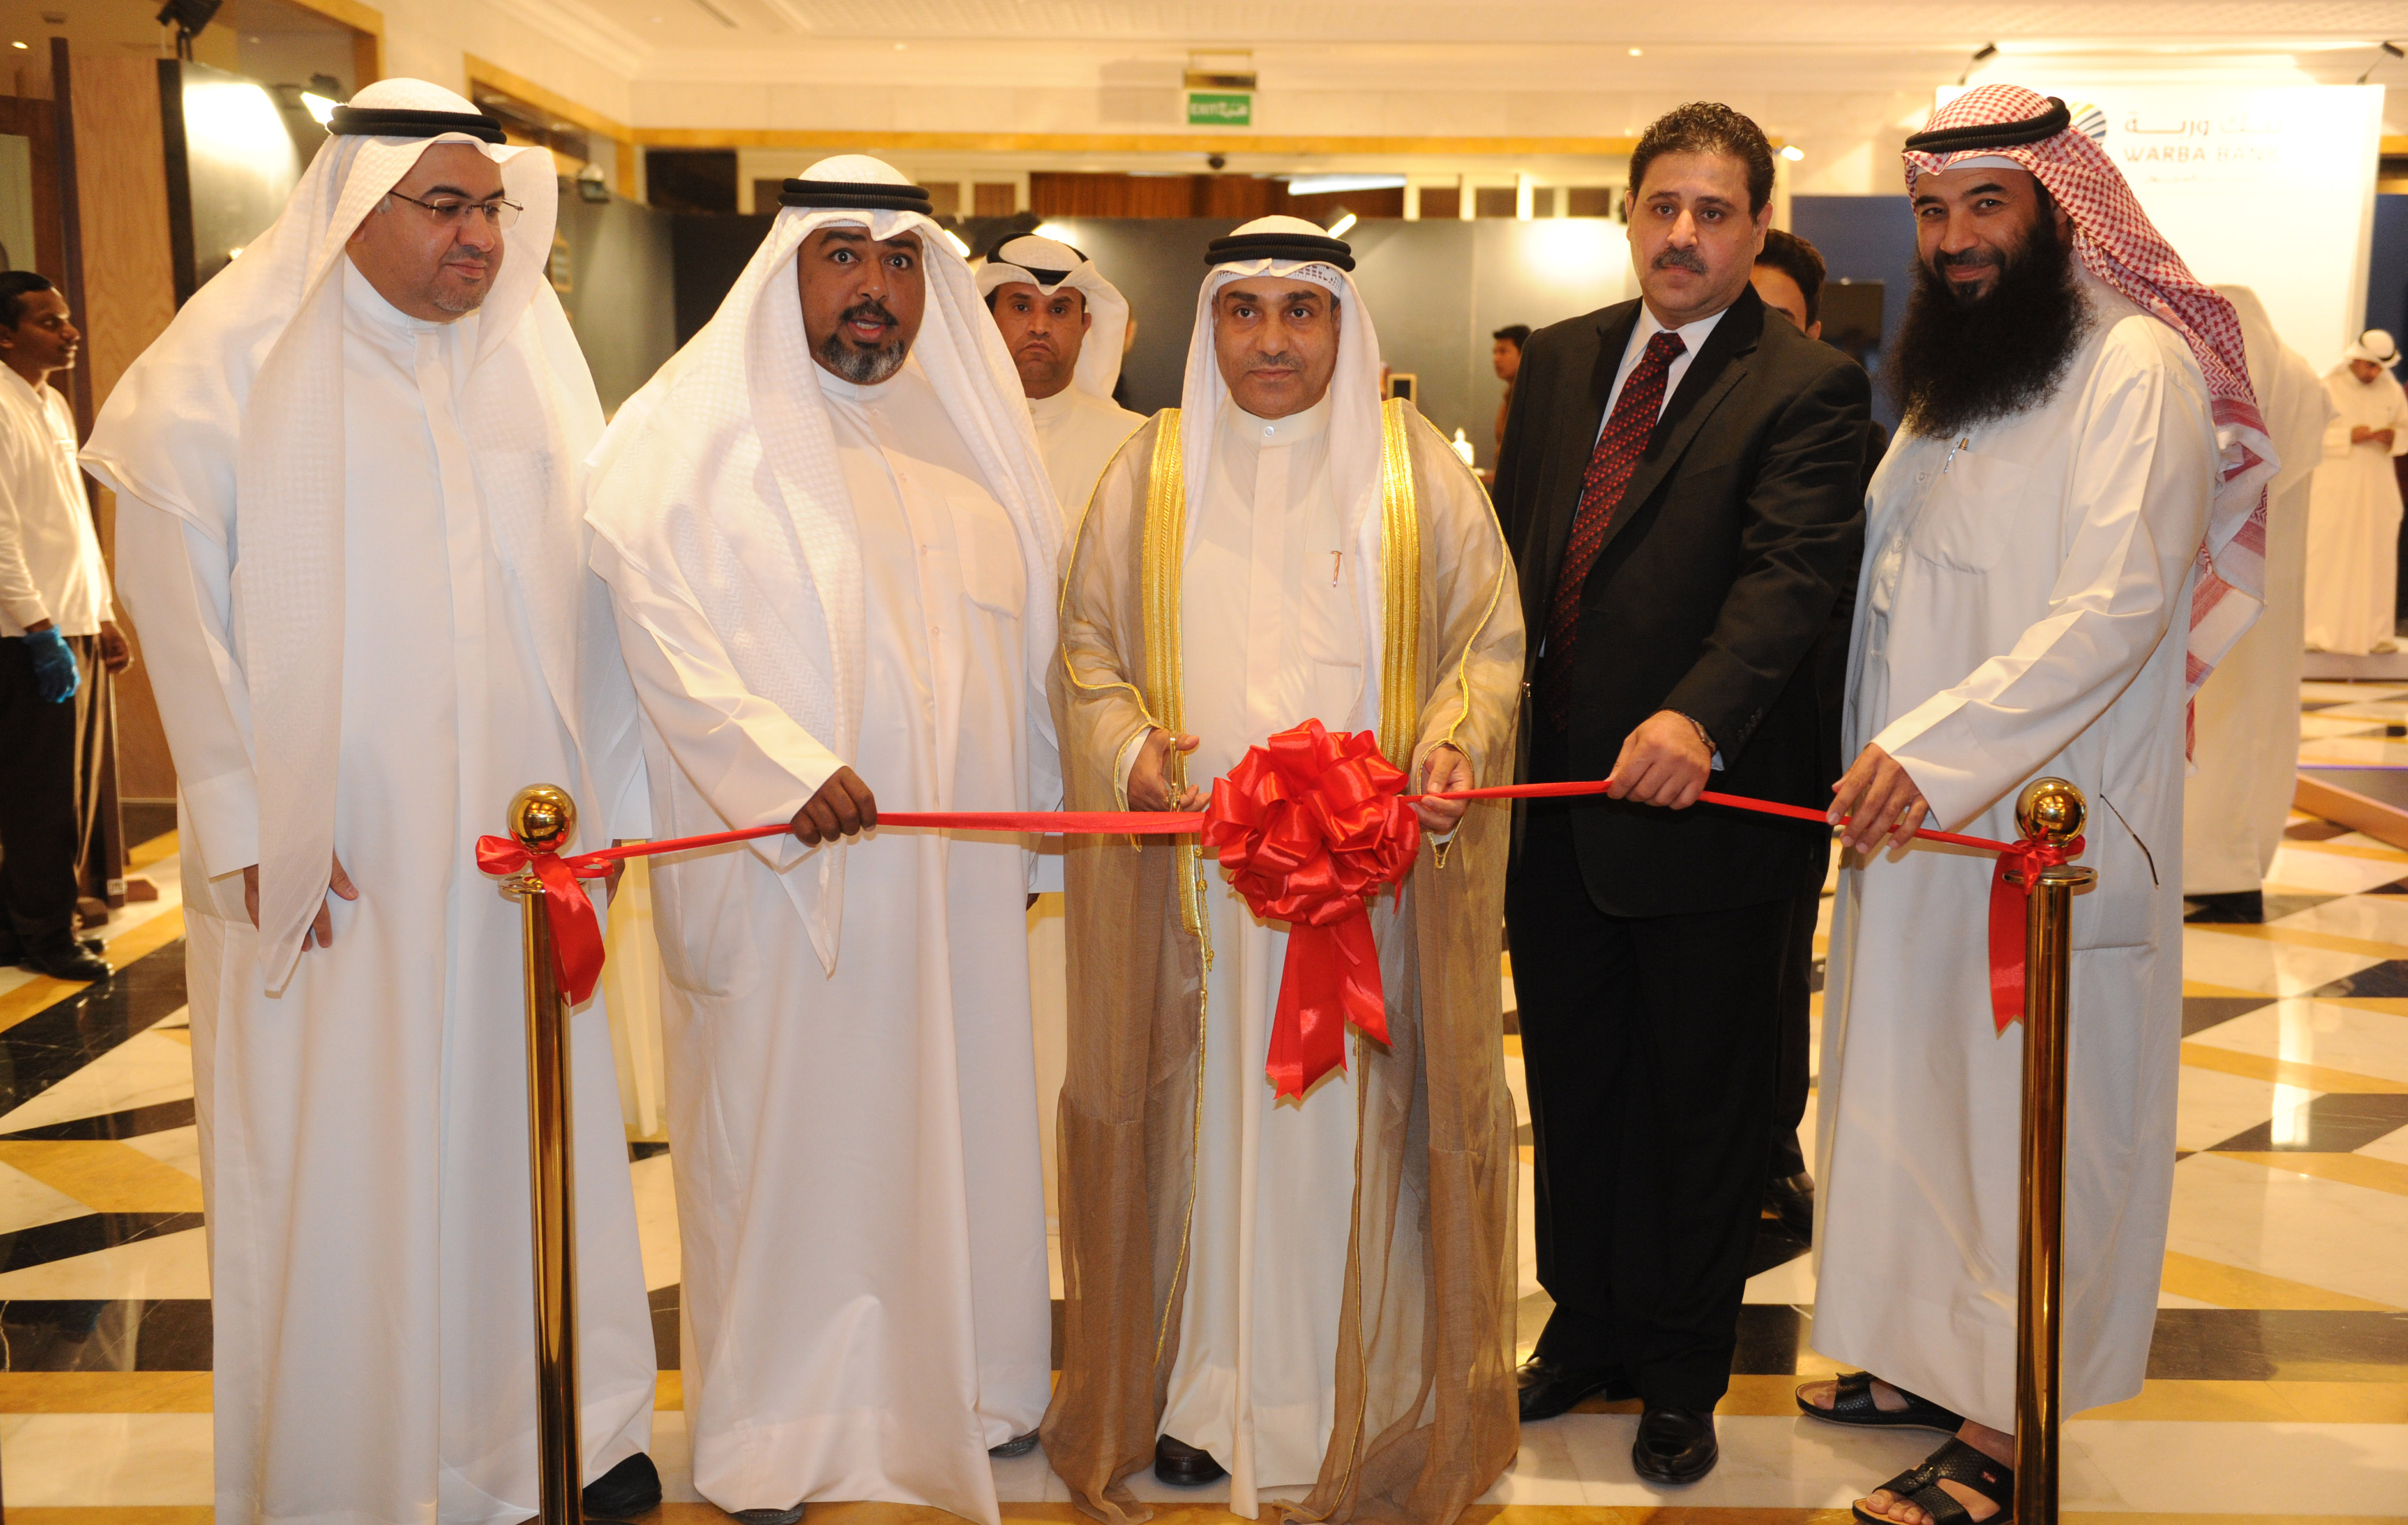 Assistant Undersecretary of Ministry of Commerce and Industry for Technical Affairs and Trade Development Abdullah Al-Enezi opens the 2016 International Finance, Real Estate, and Investment Expo